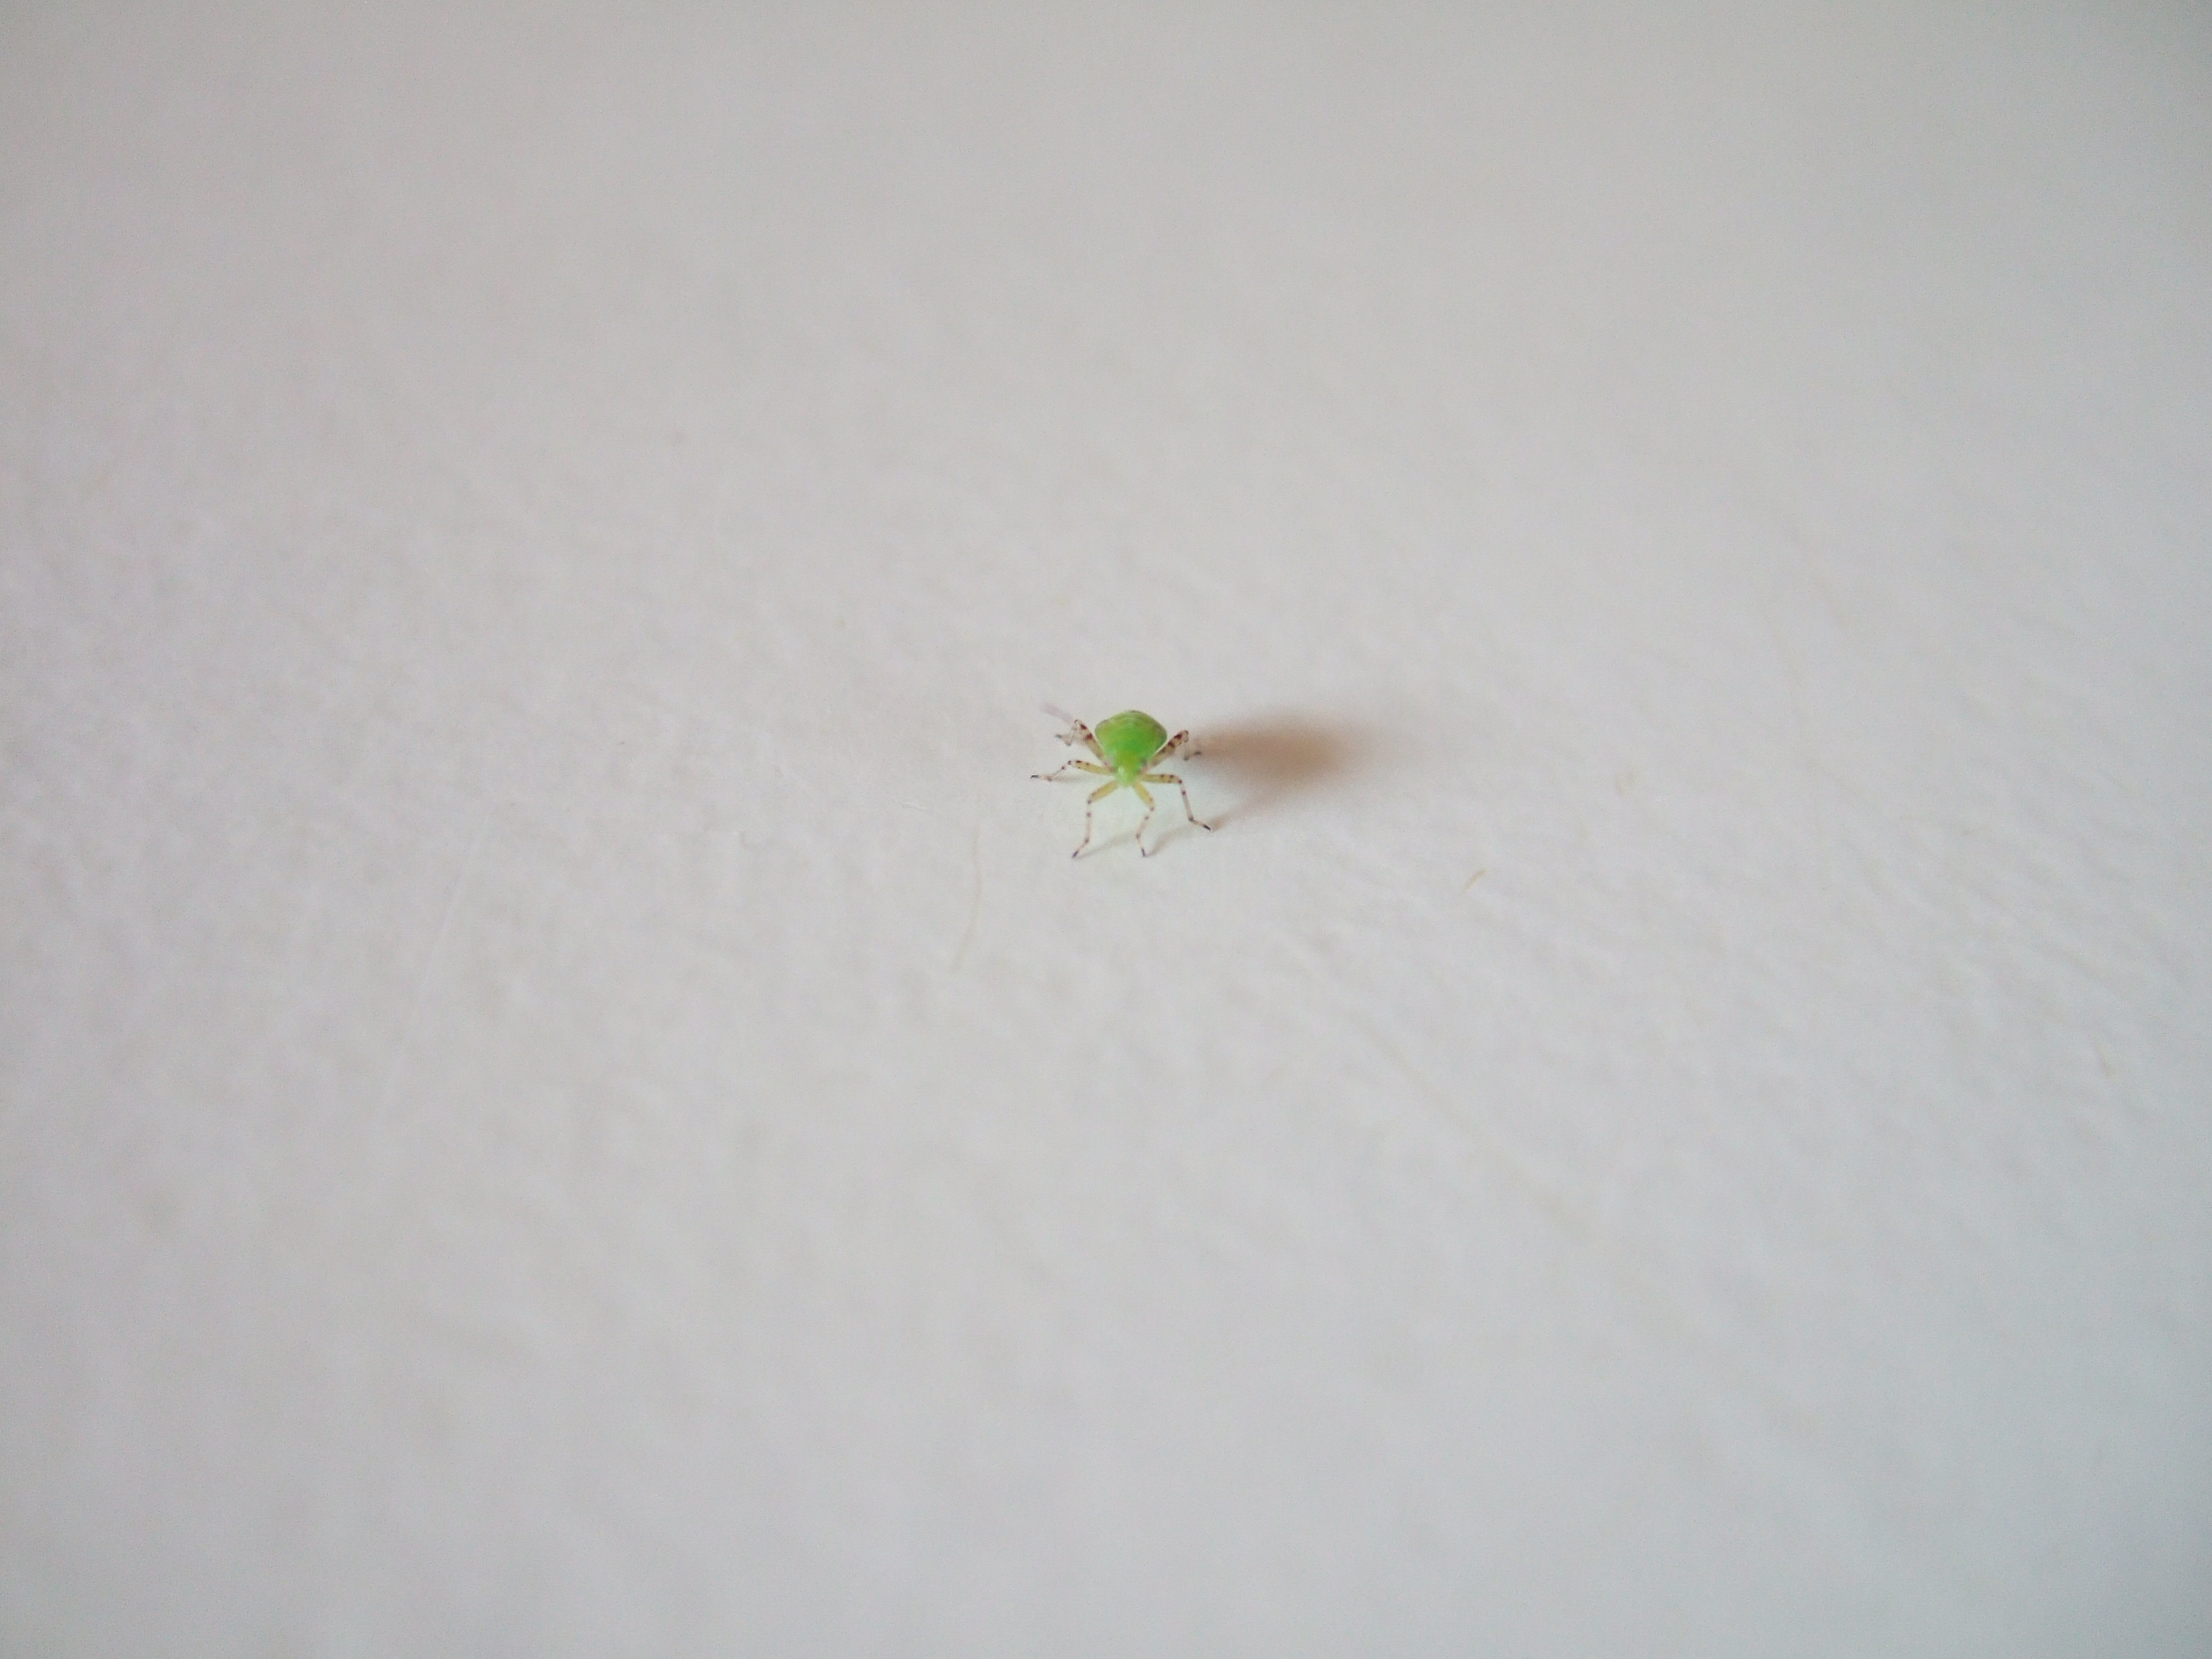 tabus insect green tiny louse white background legs